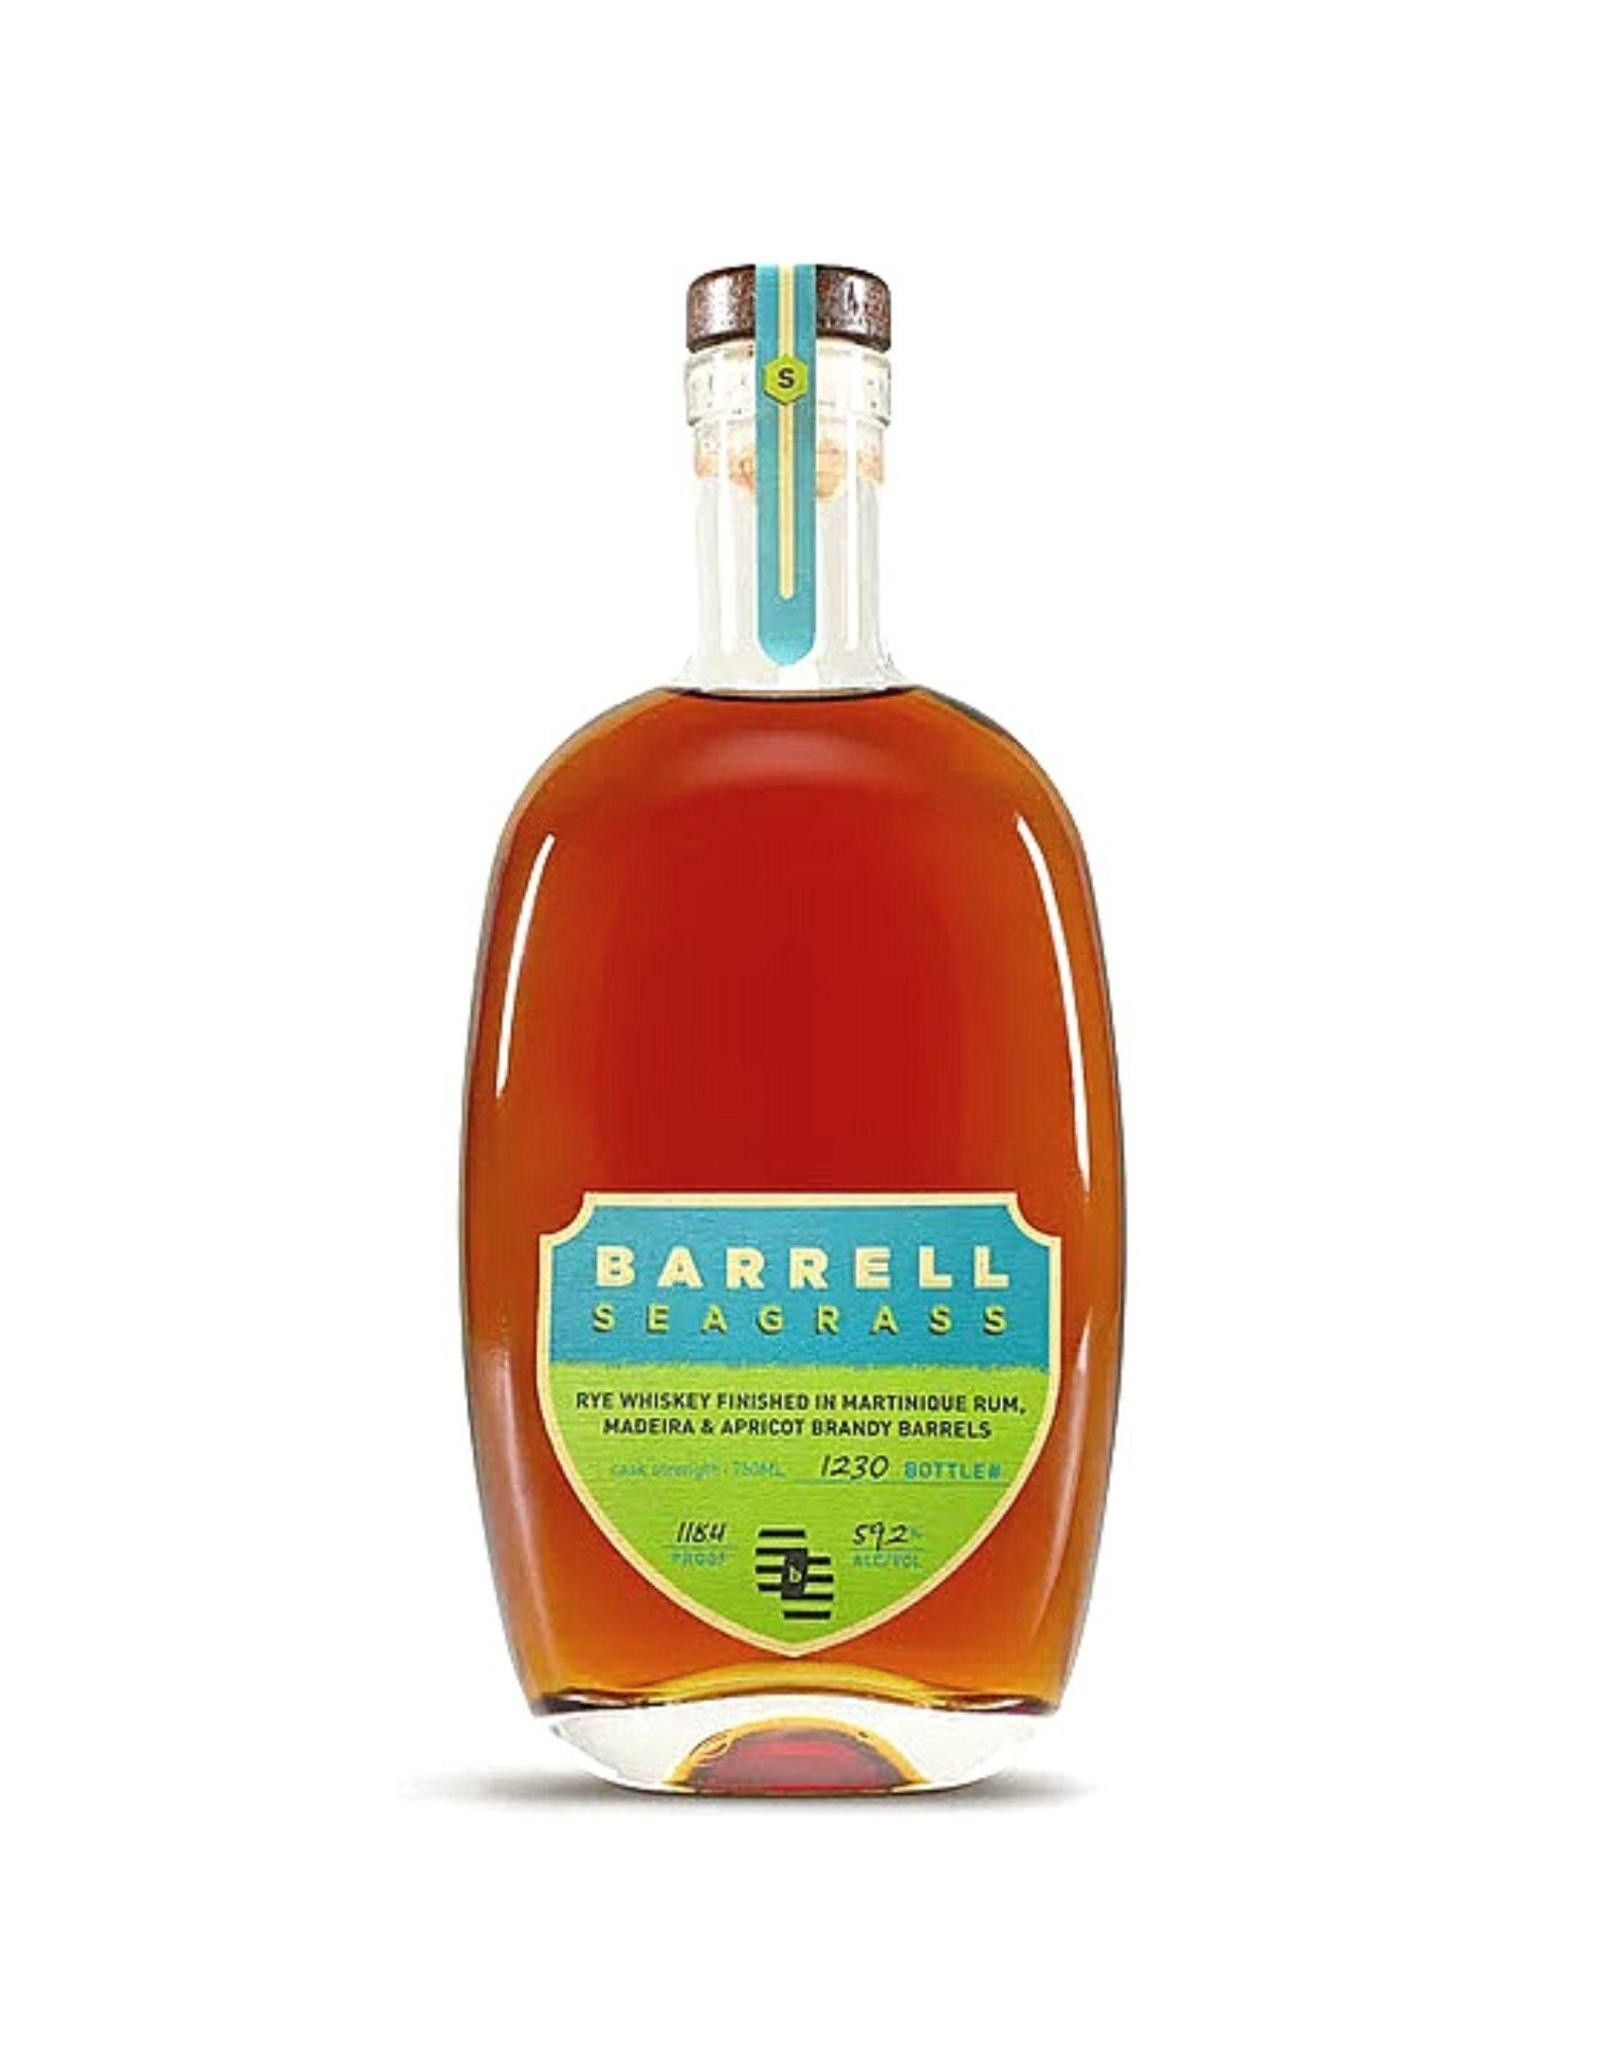 Barrell Bourbon Barrell bourbon Seagrass Rye Whiskey Finished in Martinique Rum 750ml